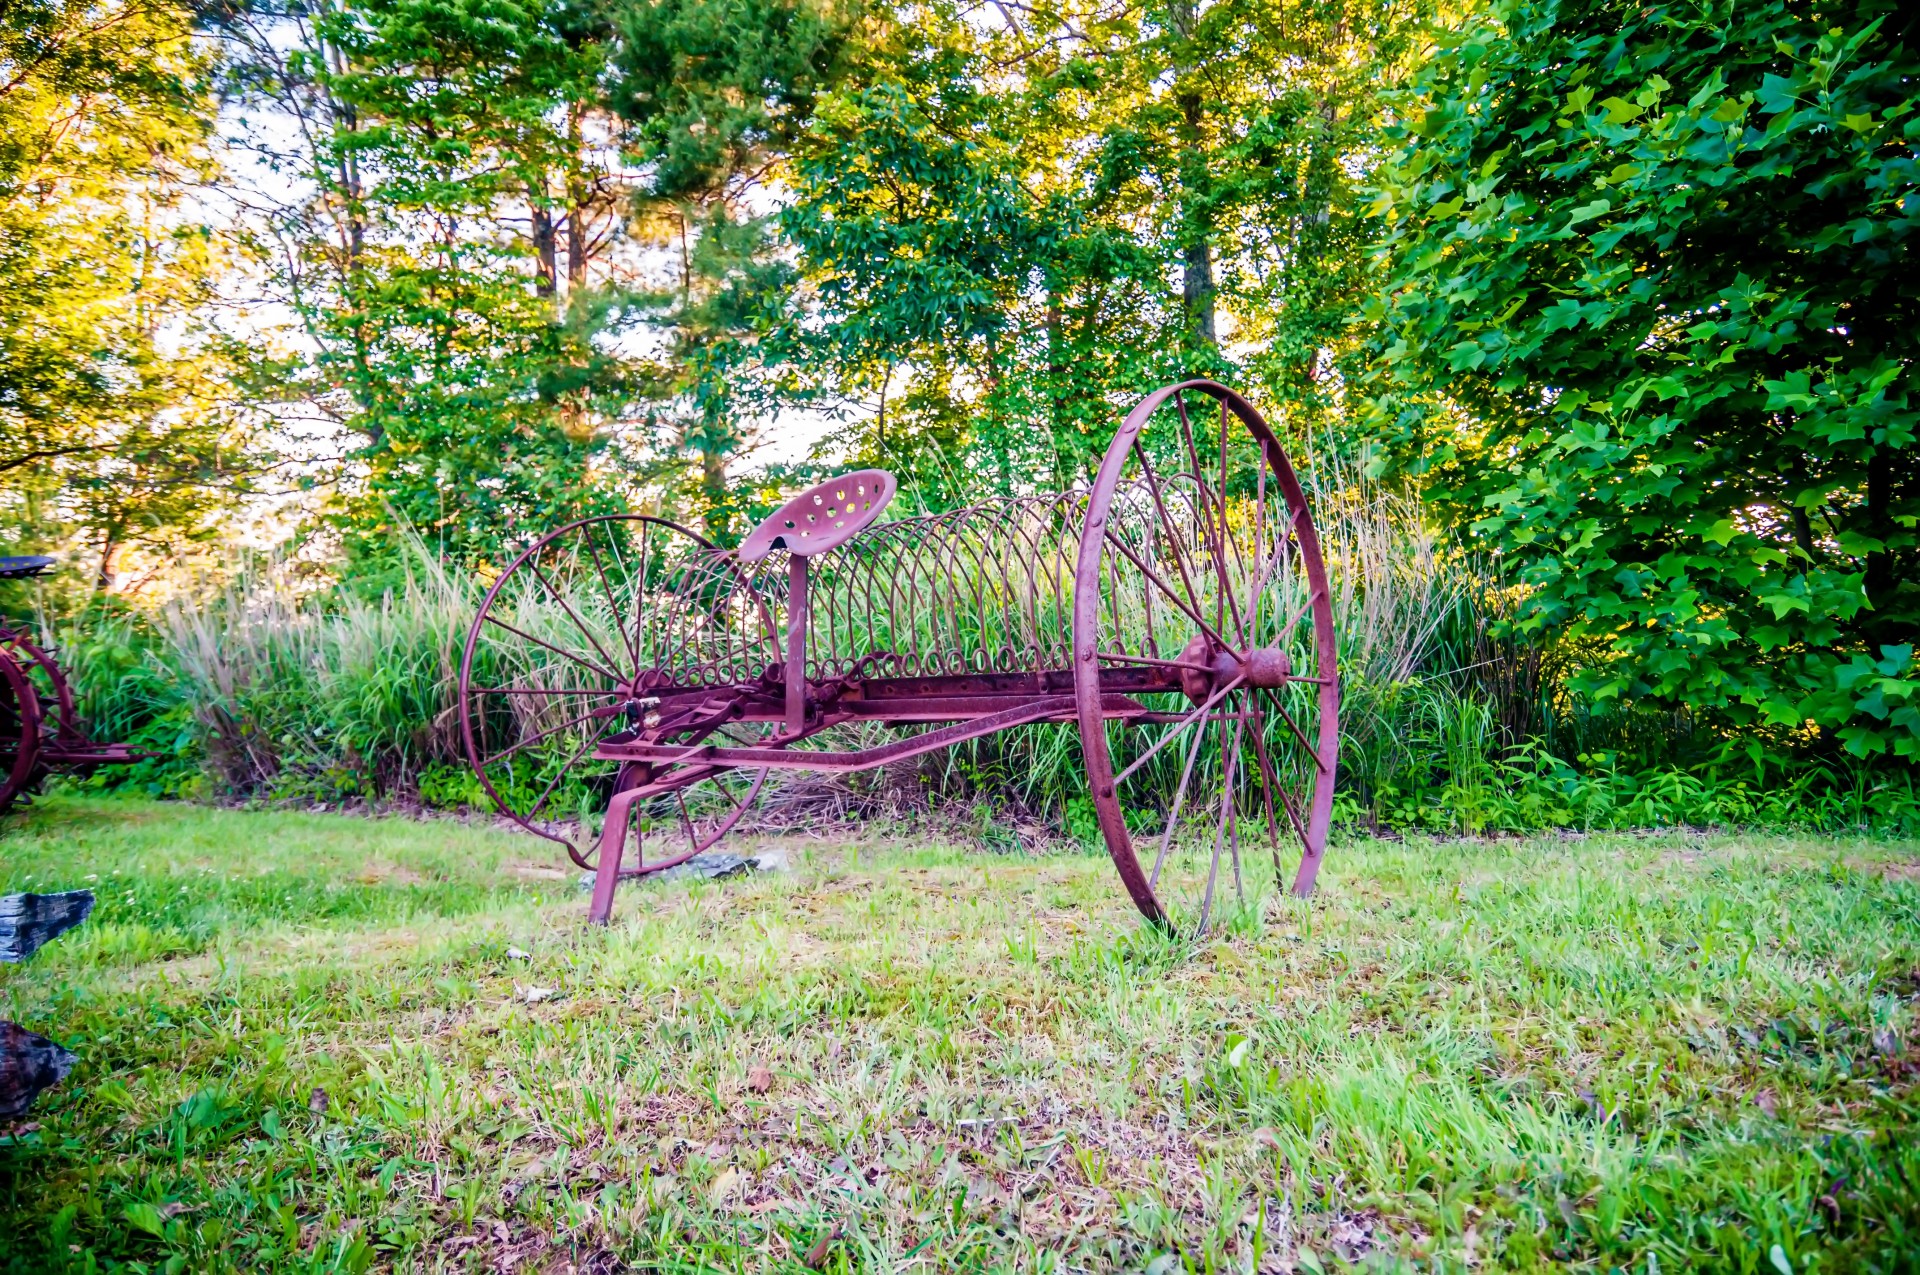 abandoned rusty agriculture equipment